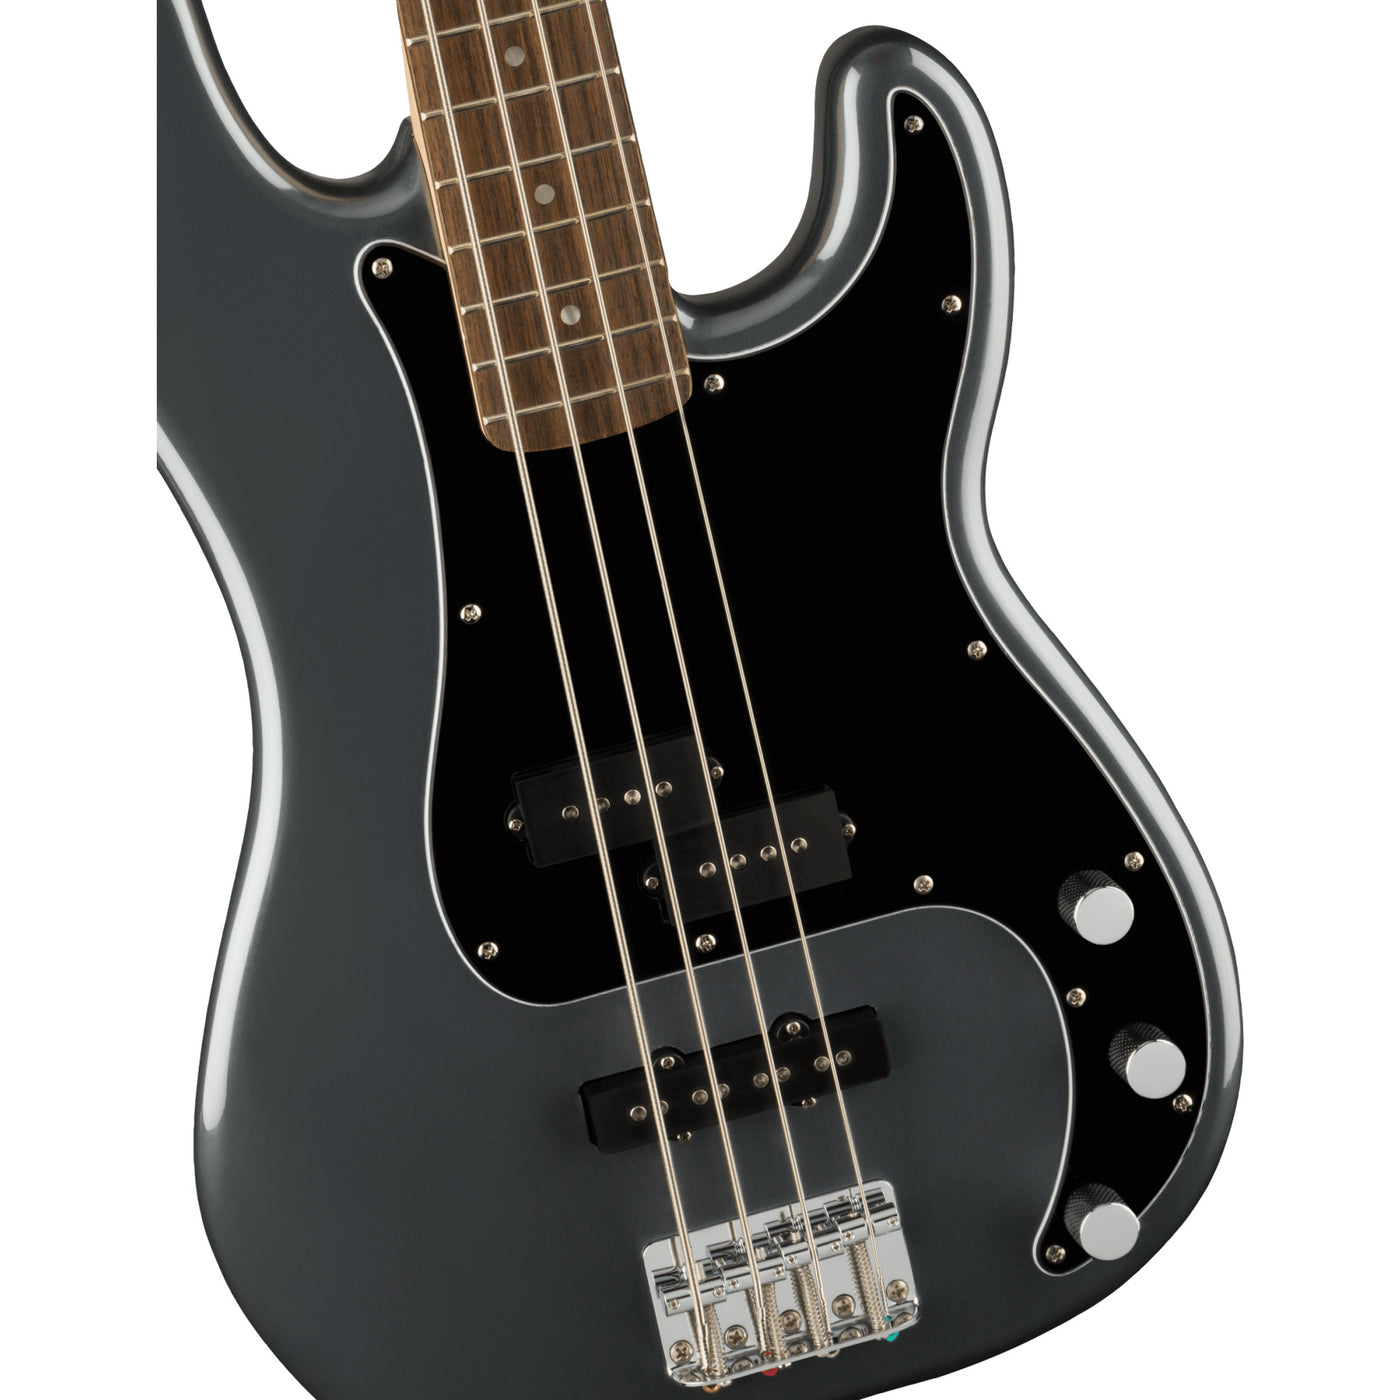 Fender Affinity Series Precision Bass PJ, Charcoal Frost Metallic (0378551569)